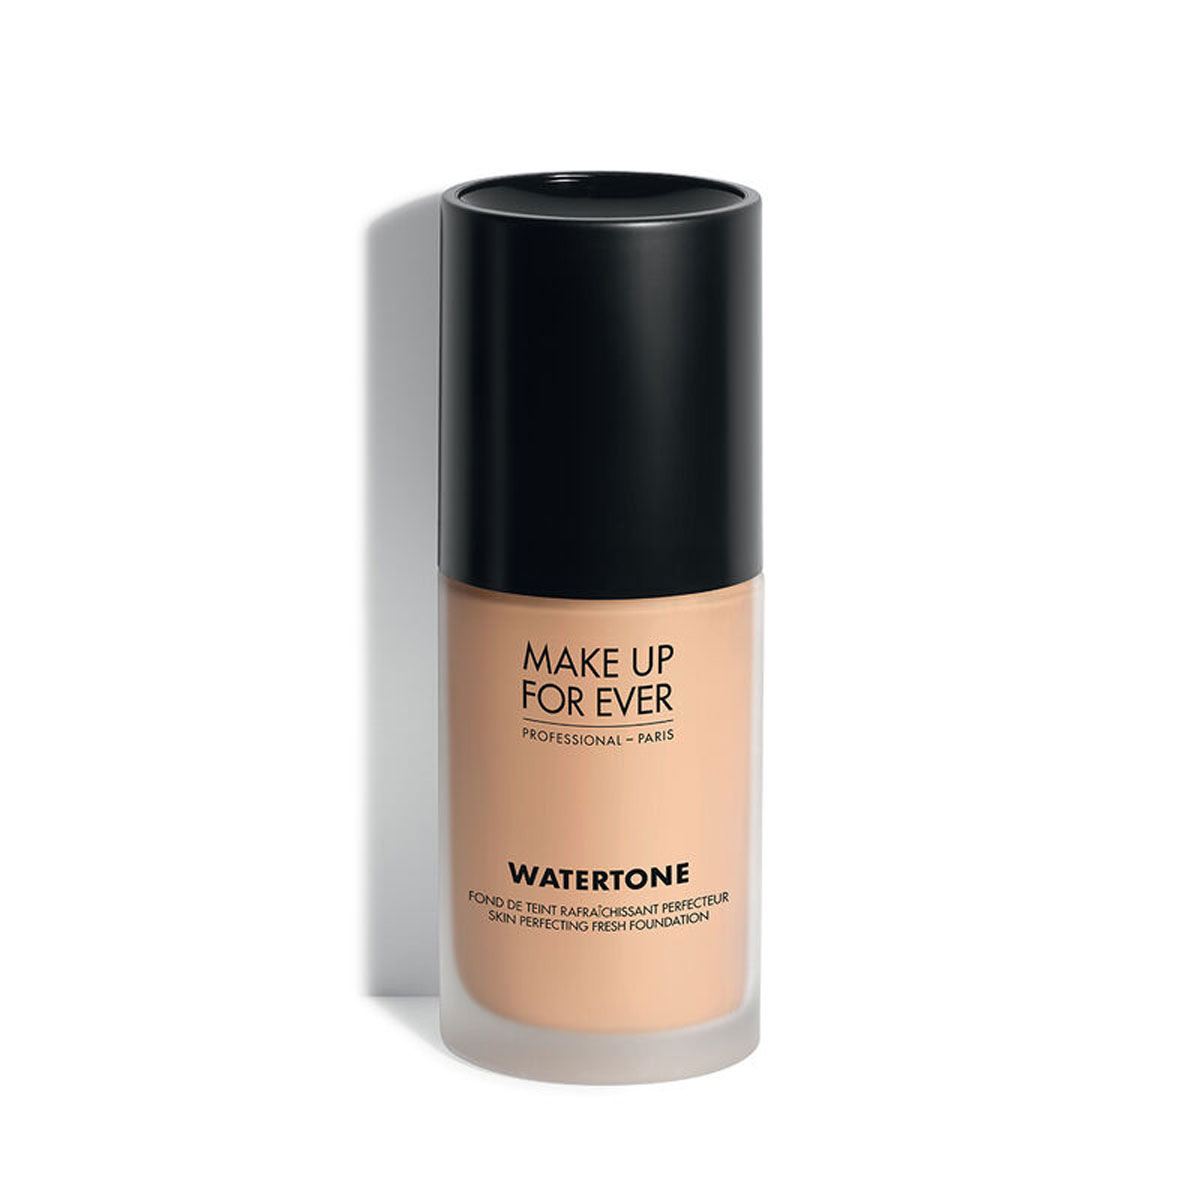 Make Up For Ever Watertone - Transfert-Proof Foundation, Natural Radiant Finish Y315 Sand (40 Ml)